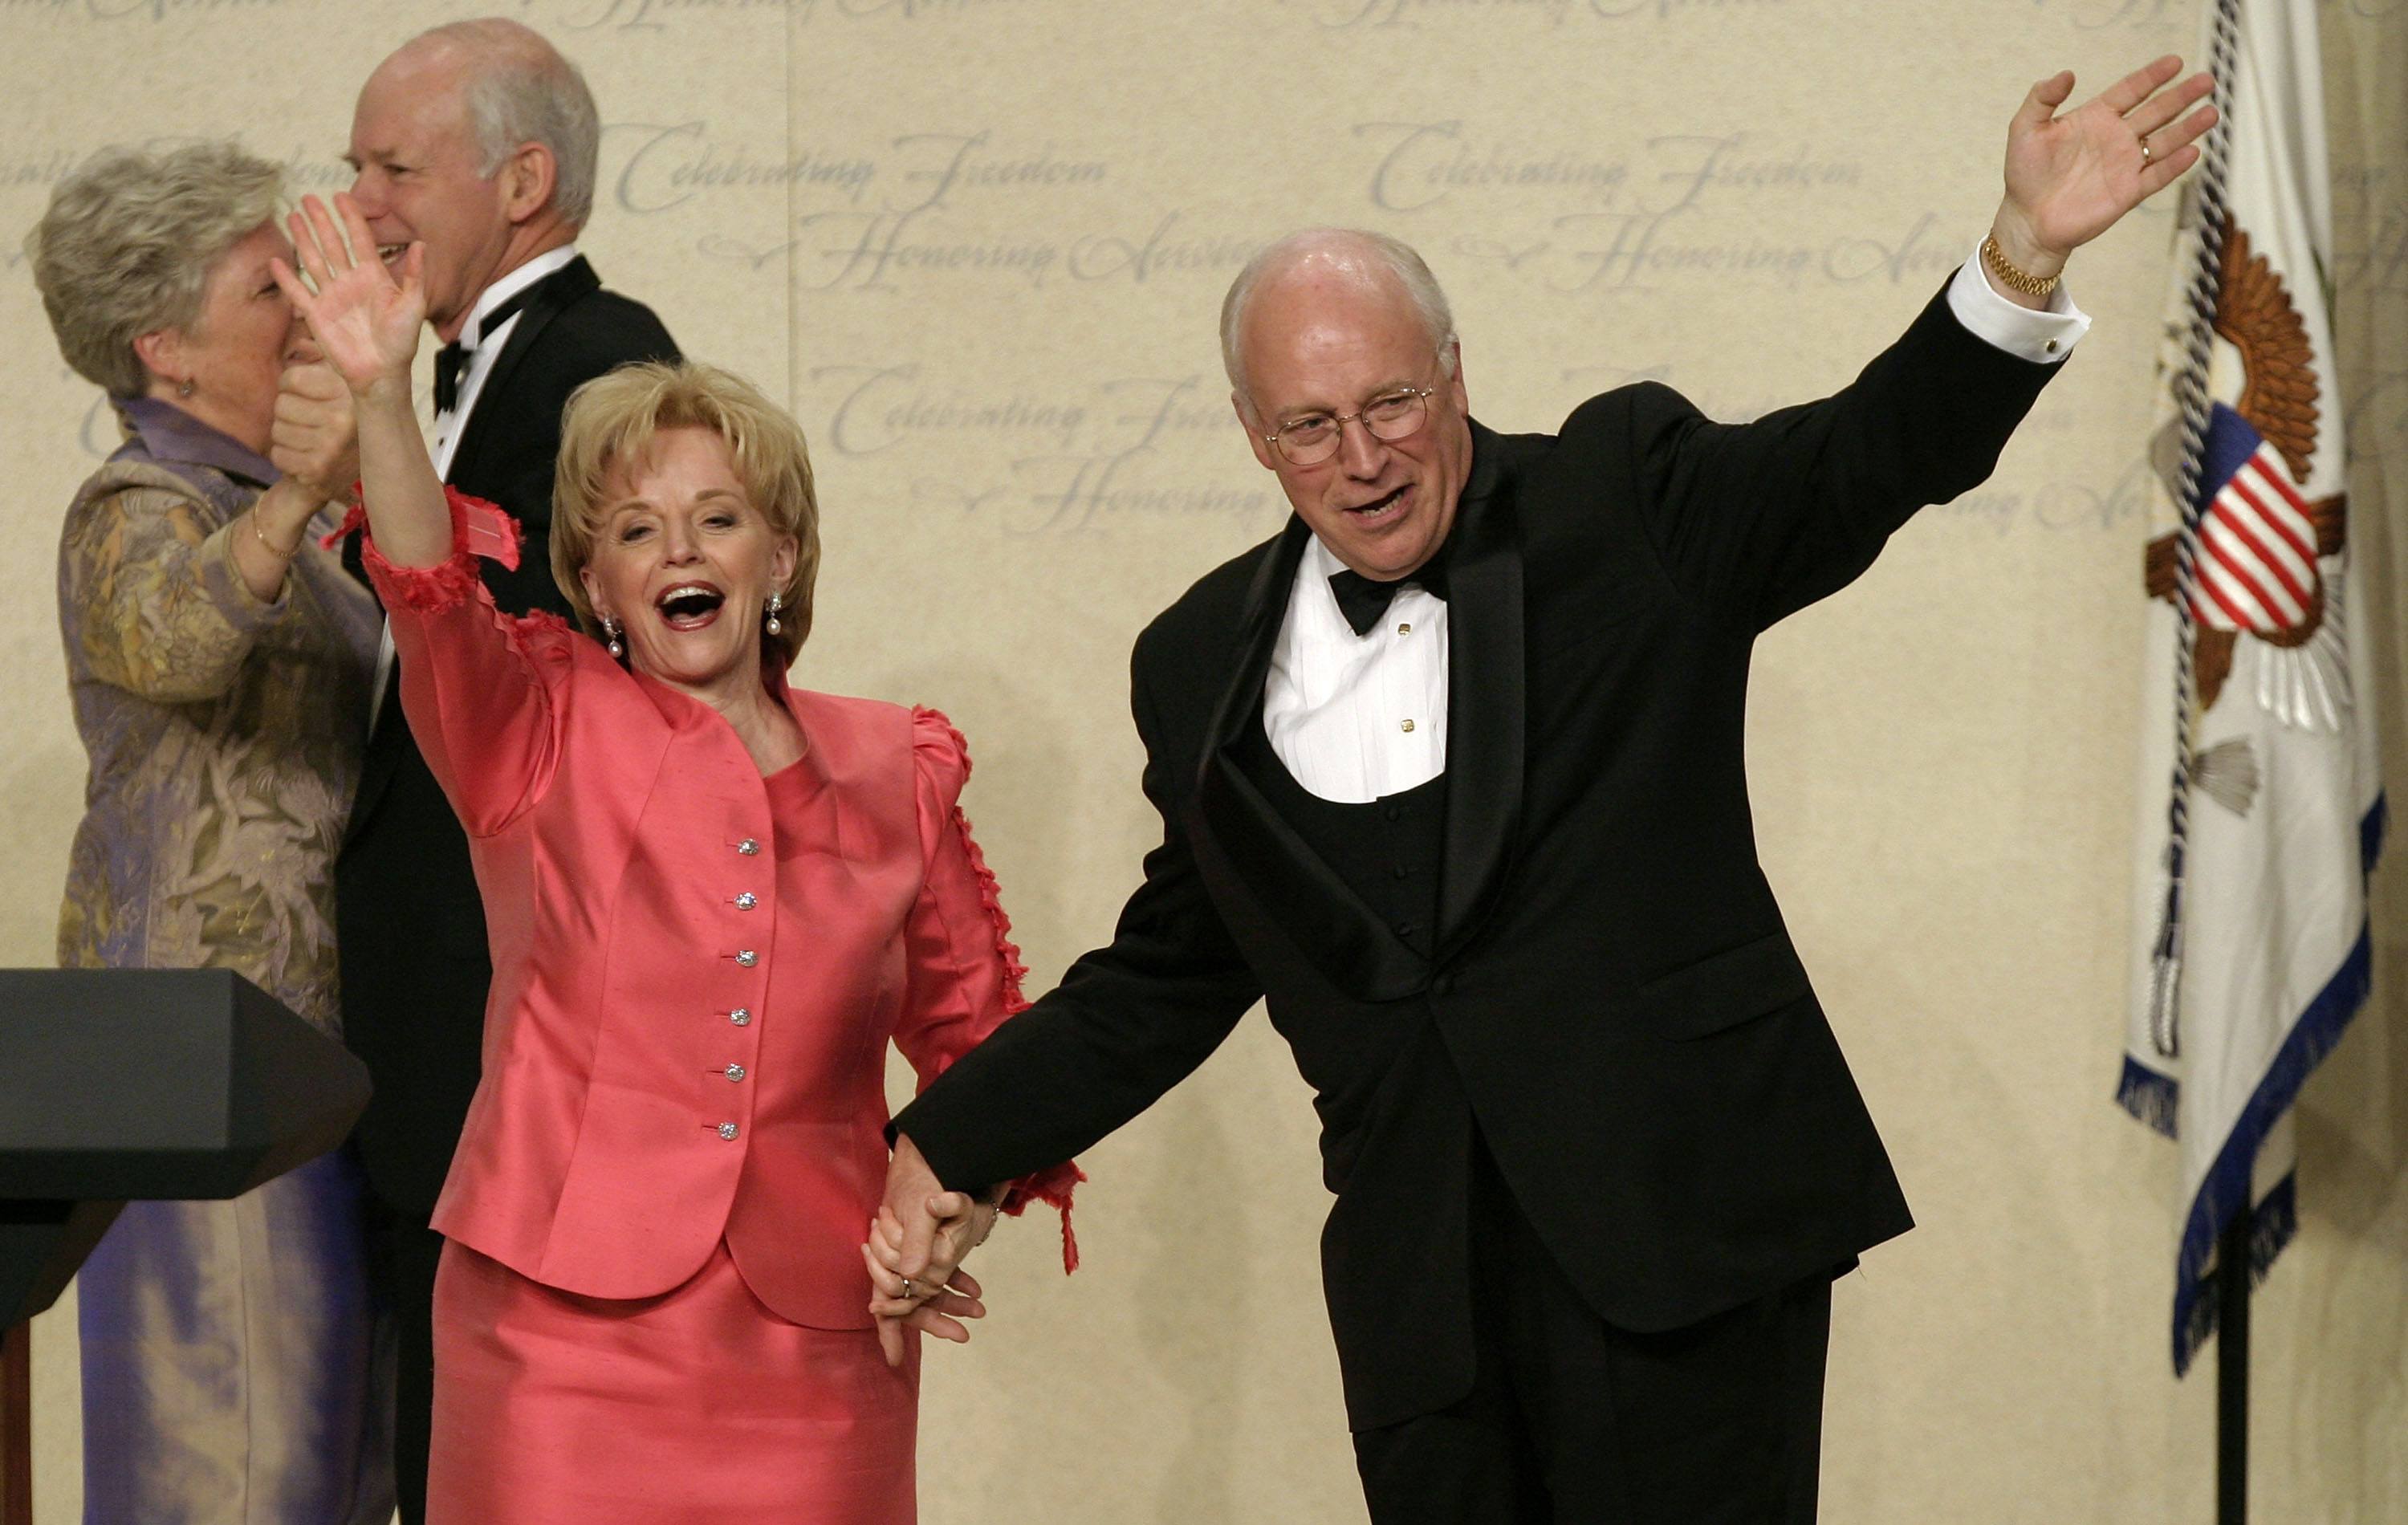 Dick cheney's wife images